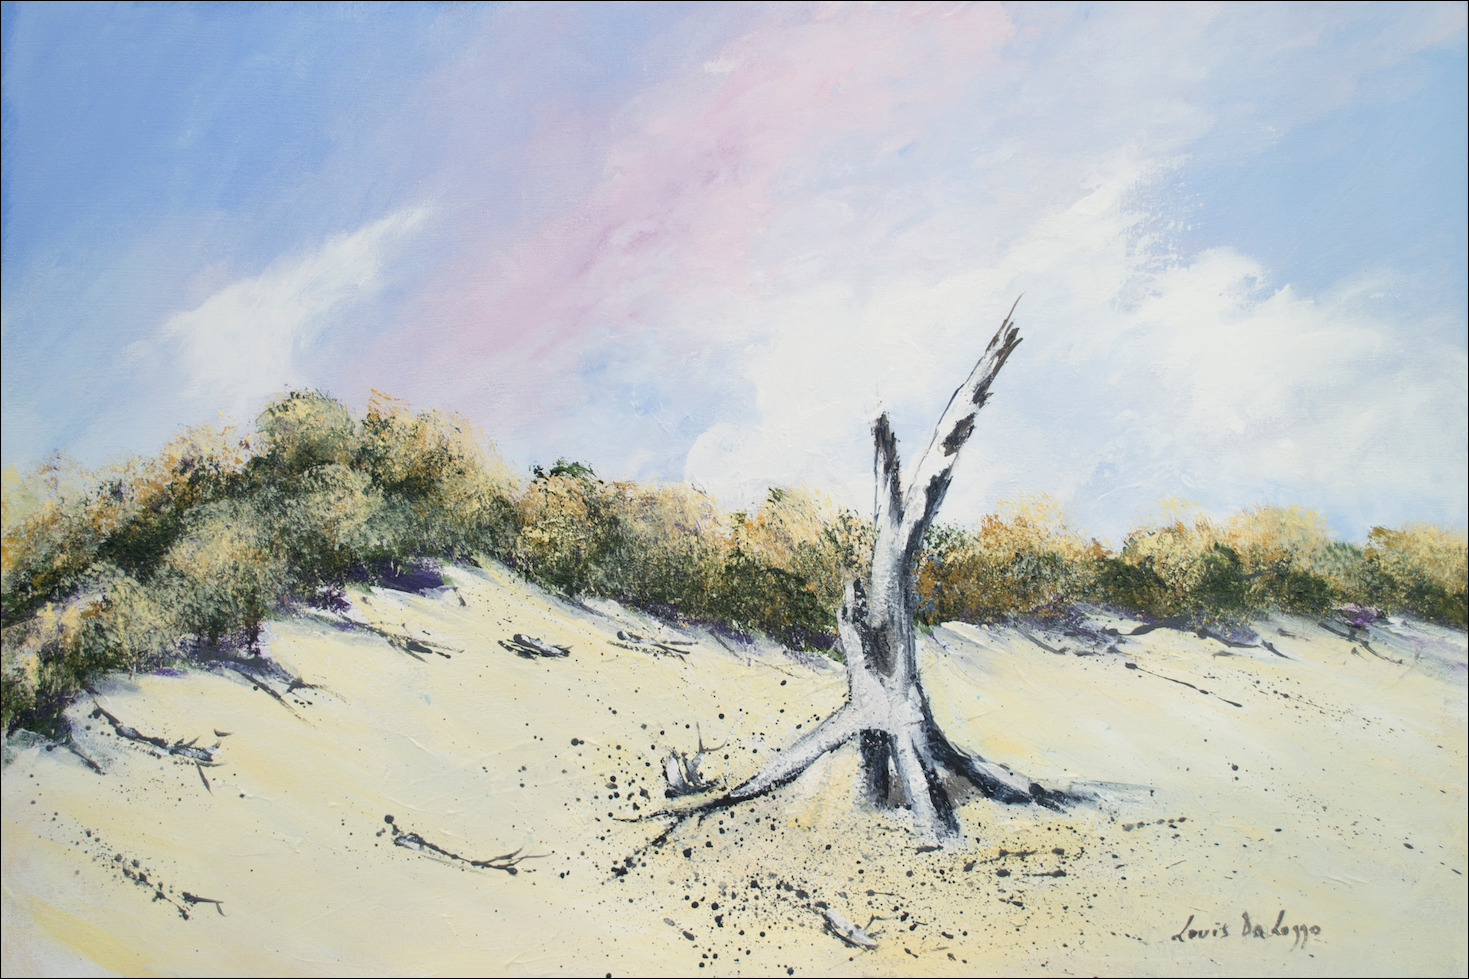 Beach Seascape Painting "Once a Great Tree Fraser Island" by Louis Dalozzo